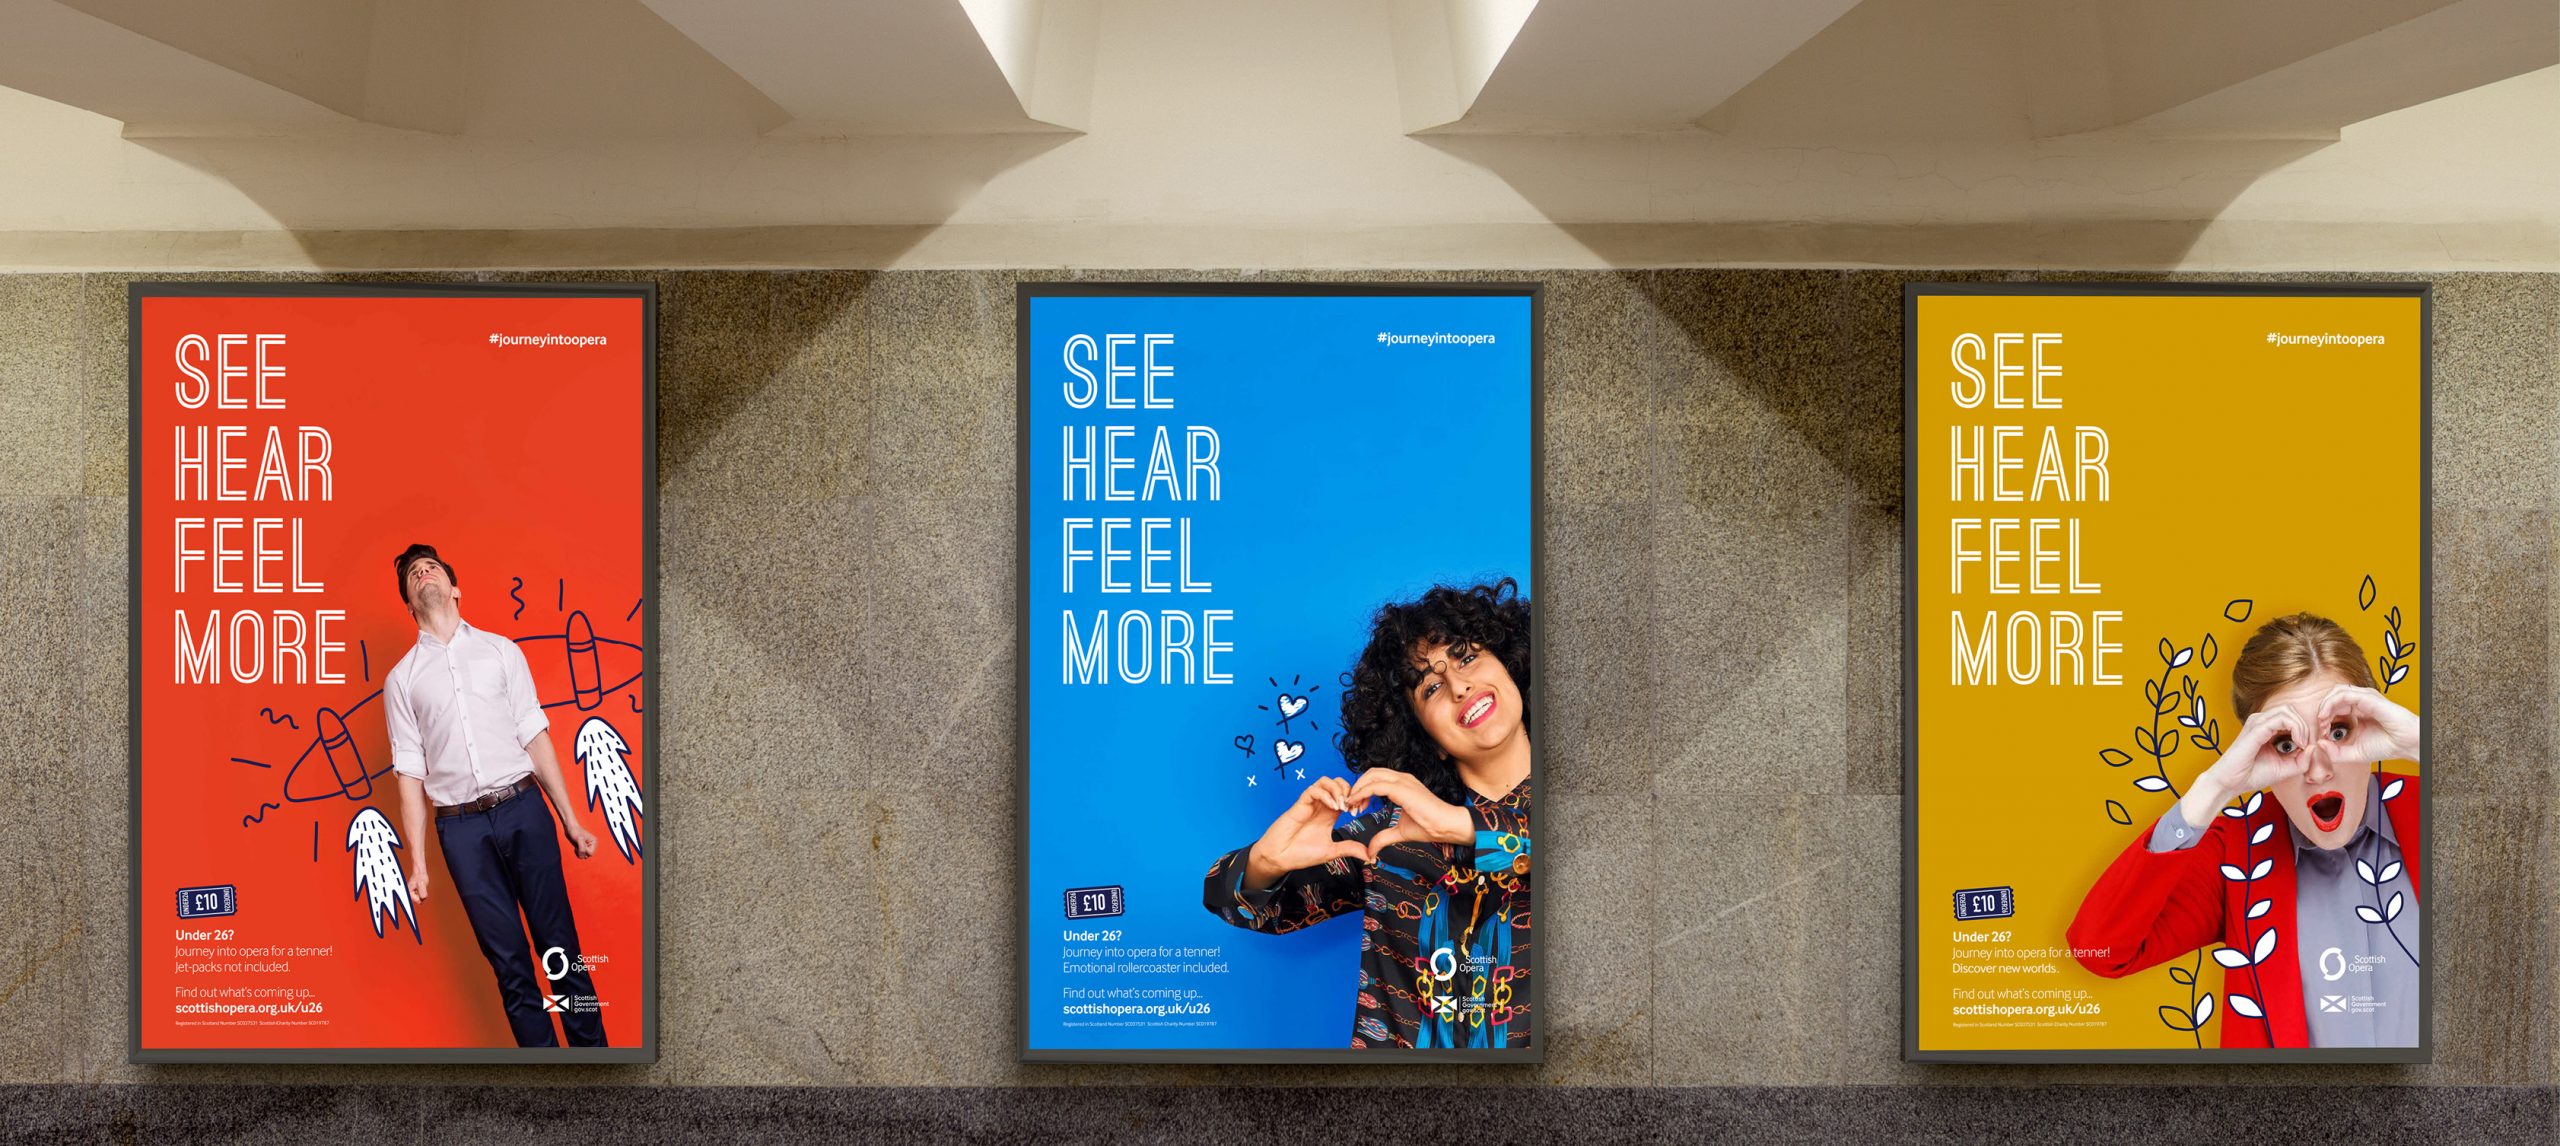 Outdoor digital advertising posters showing the 'See, hear, feel more' campaign to encourage under 26 audiences to attend opera performances.